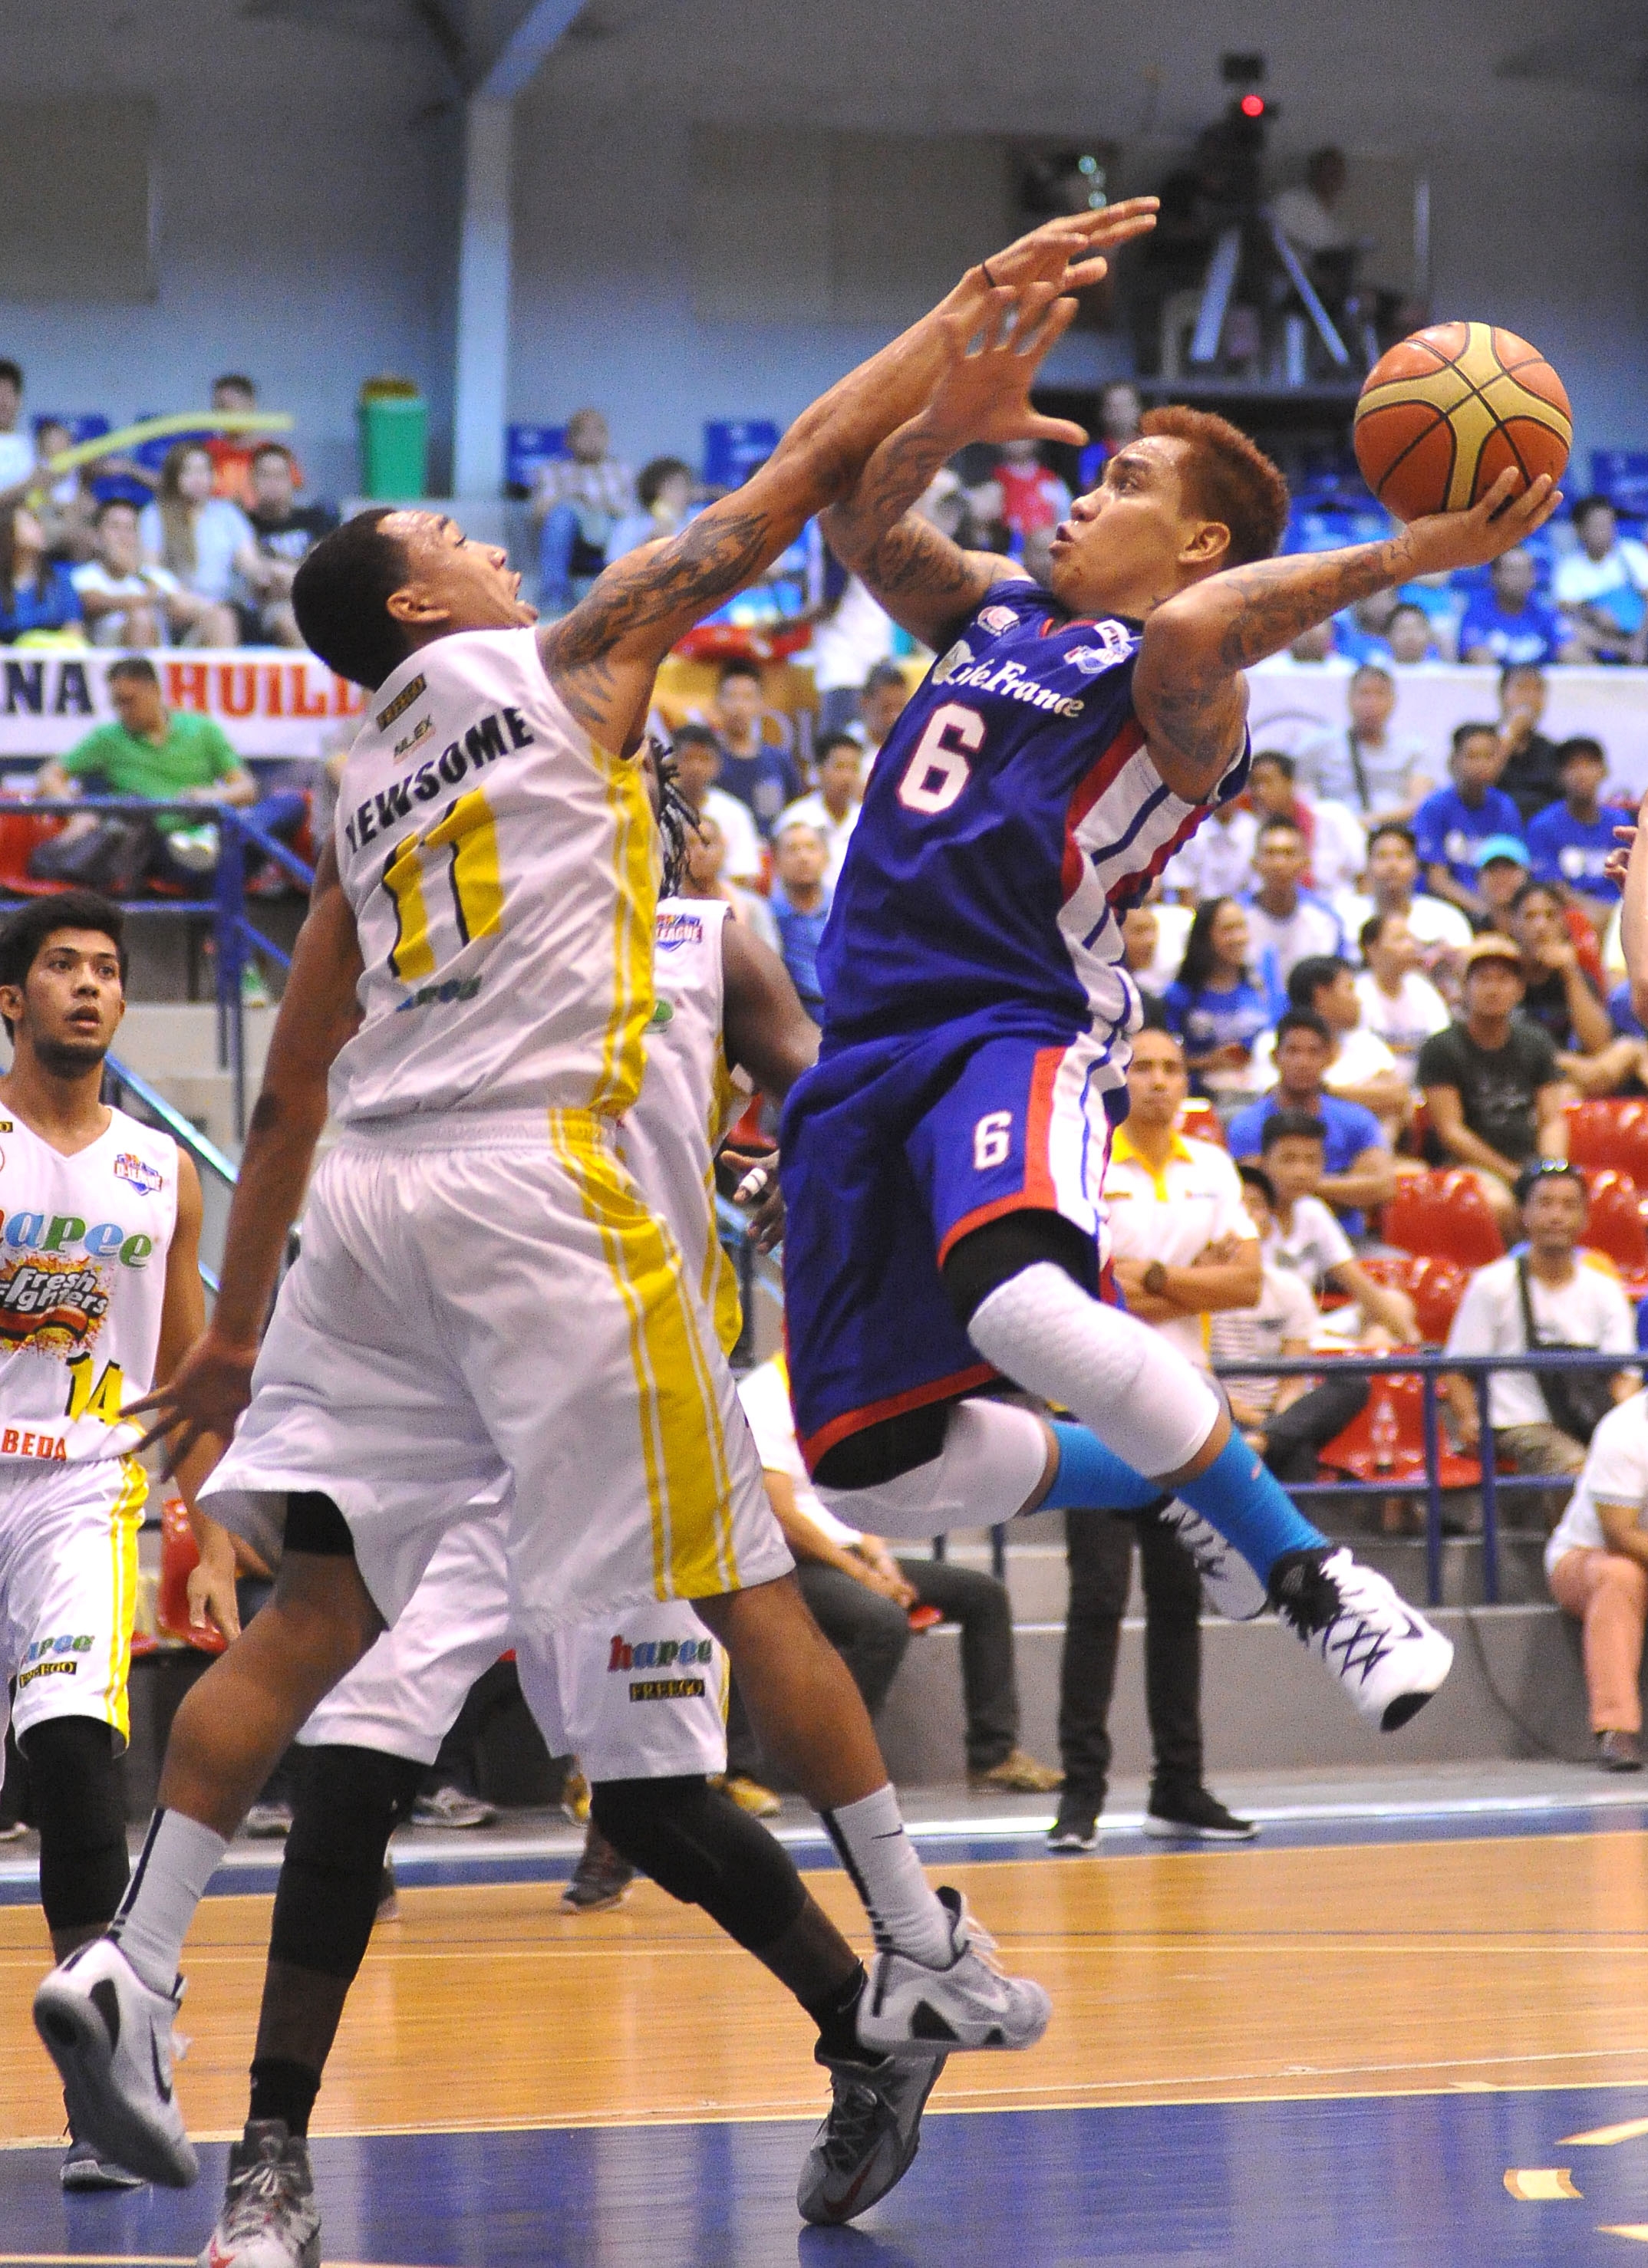 Cebuano Eluid Poligrates of Cafe France tries to put up a shot against Cris Newsome of Hapee Fresh.(INQUIRER)